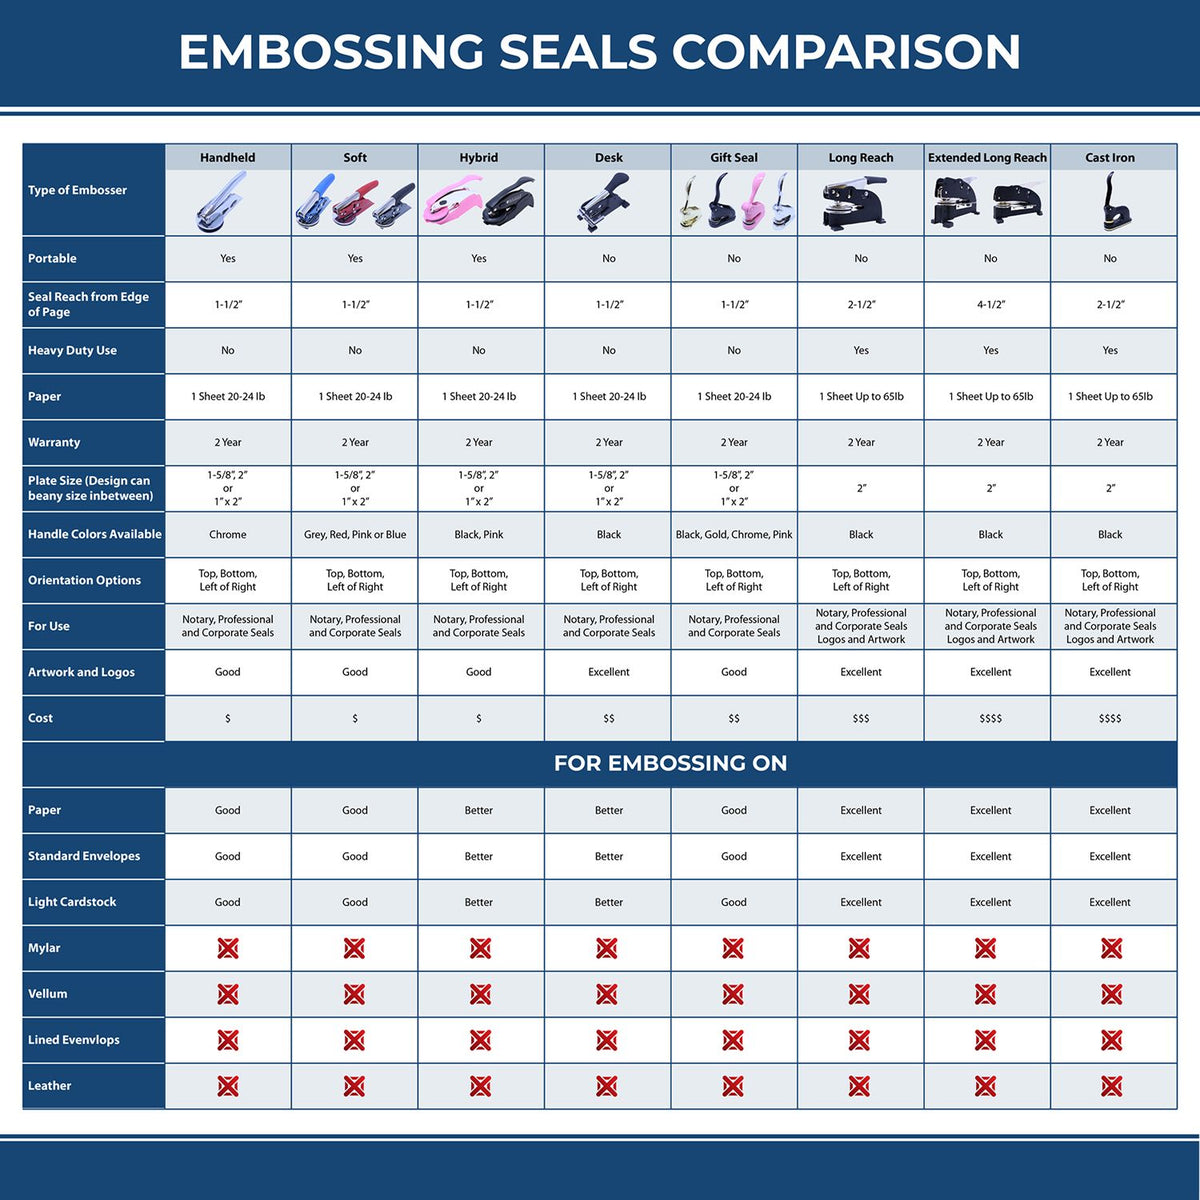 A comparison chart for the different types of mount models available for the Handheld Missouri Professional Geologist Embosser